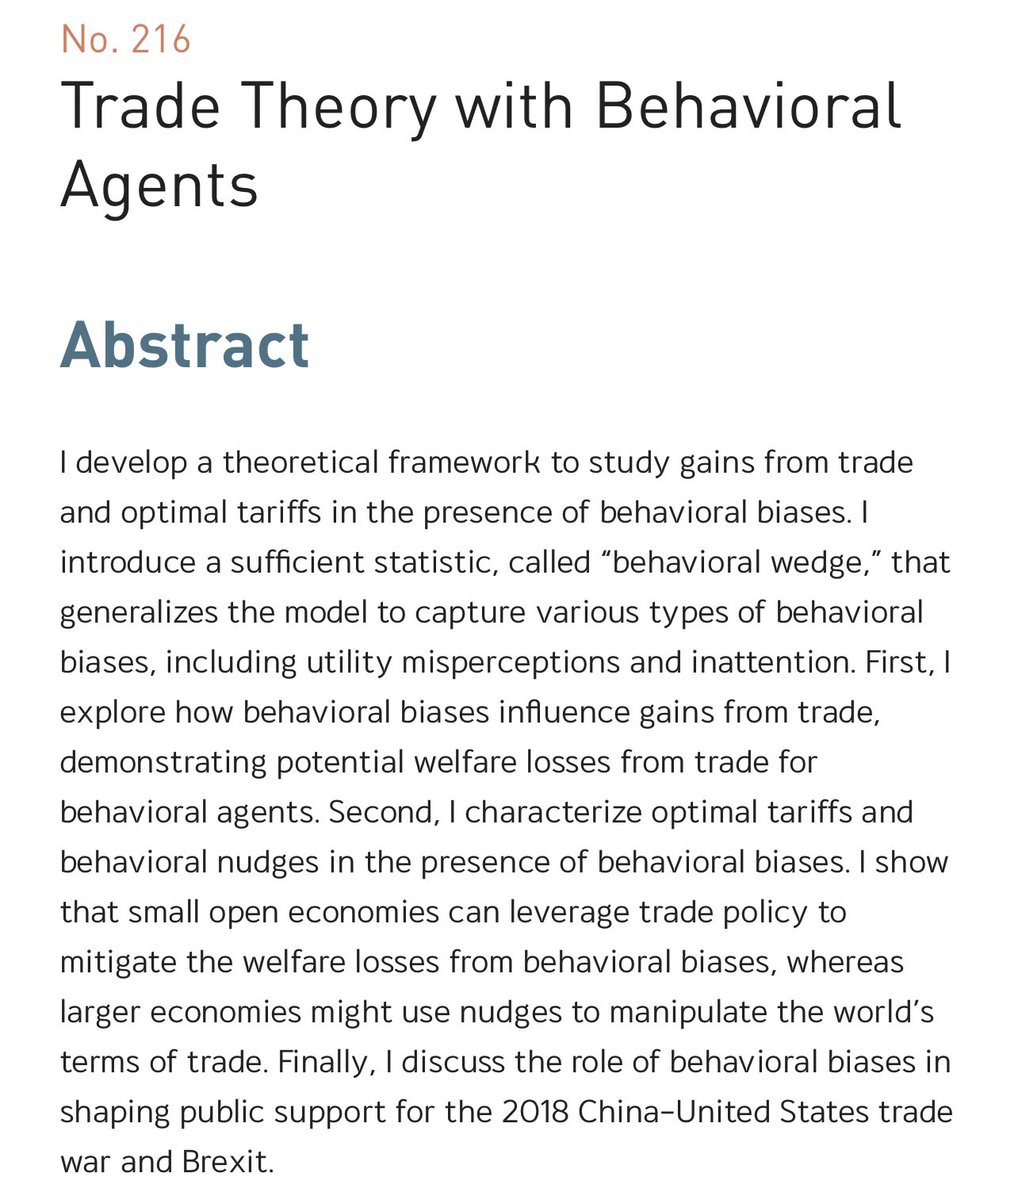 I am excited to share my new working paper 'Trade Theory with Behavioral Agents.' Link: pier.or.th/en/dp/216 Comments and suggestions are very welcome! A short thread will come soon 😊